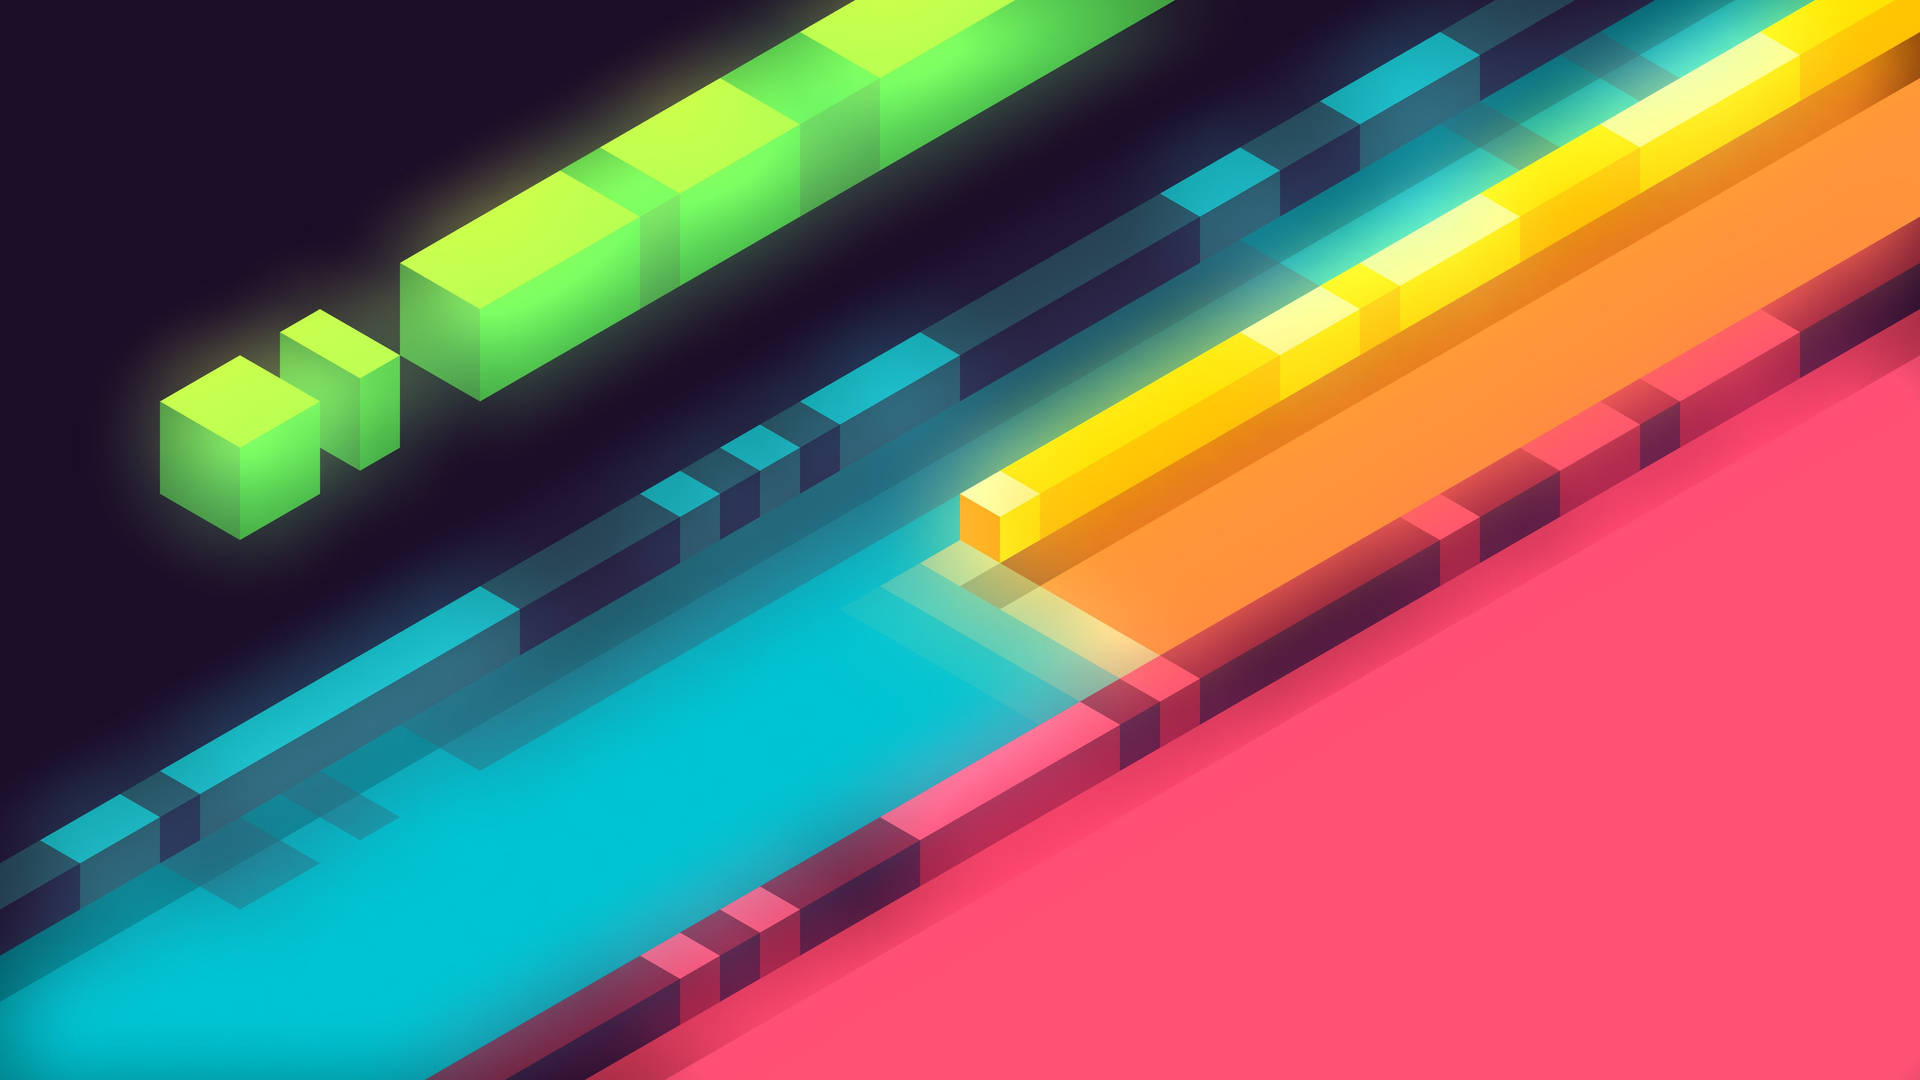 Colorful Abstract Lines Design Wallpaper